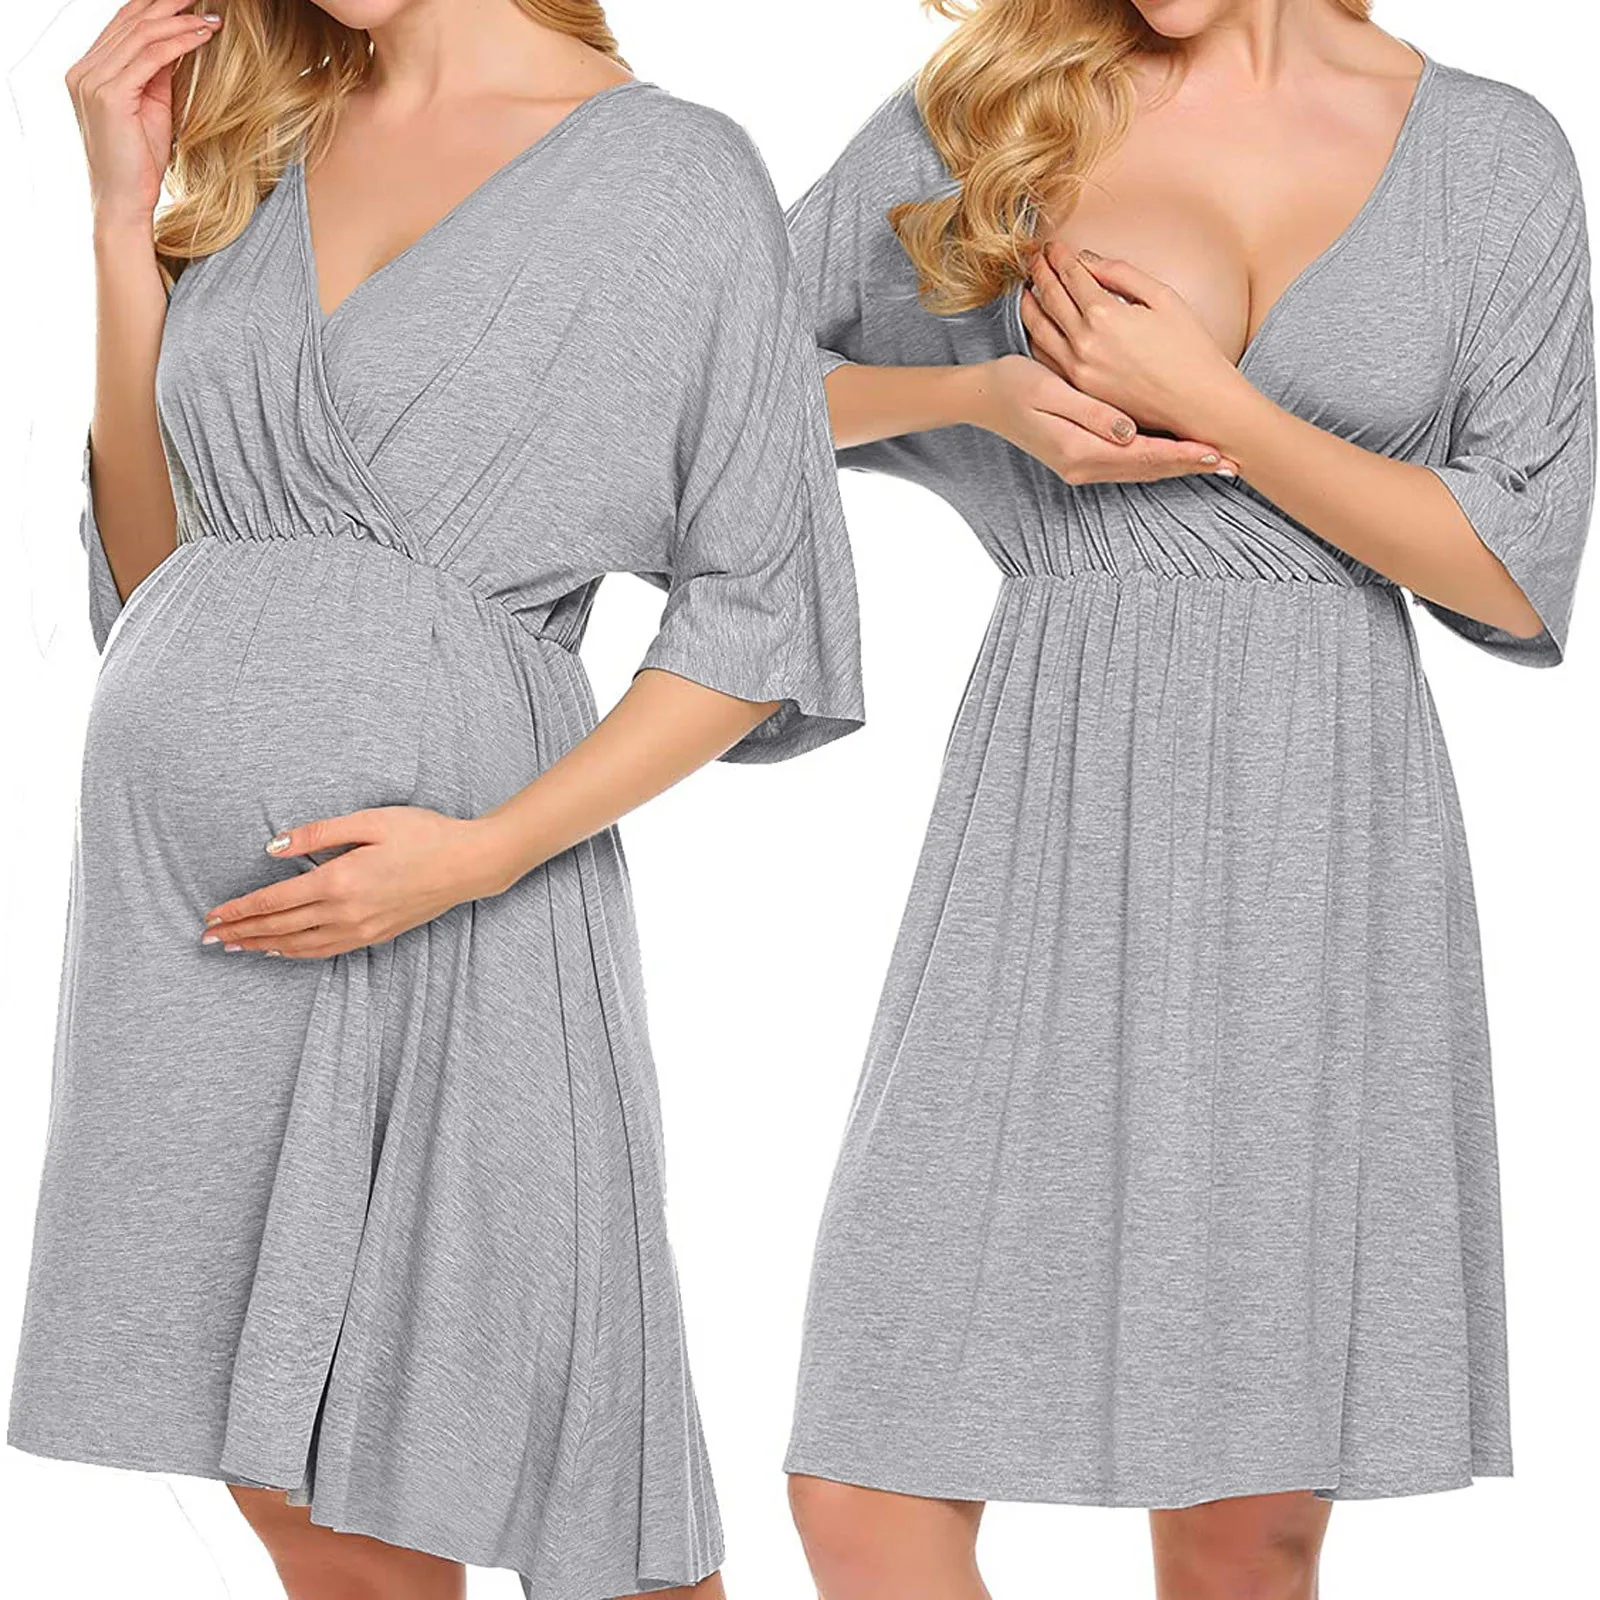 Women's Maternity Dress Nursing Nightgown For Breastfeeding Solid Color 